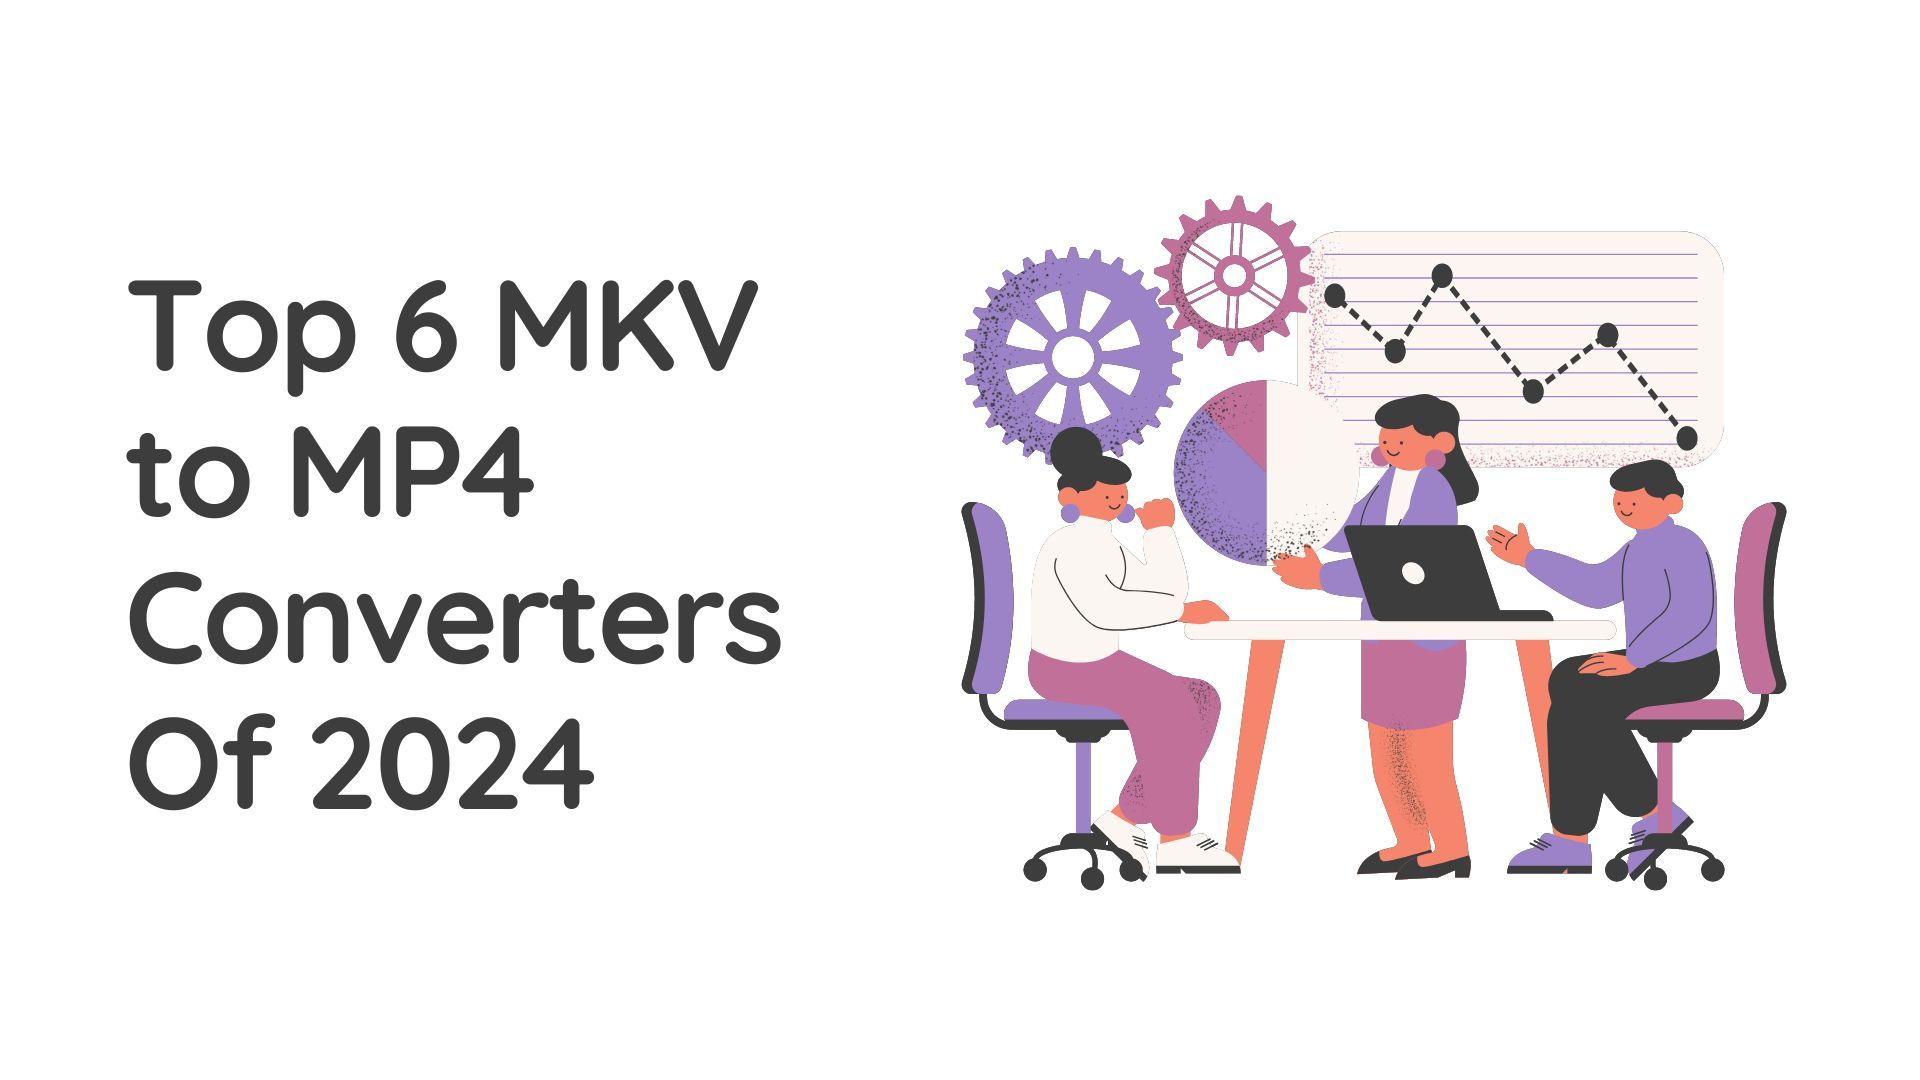 Top 6 MKV to MP4 Converters Of 2024